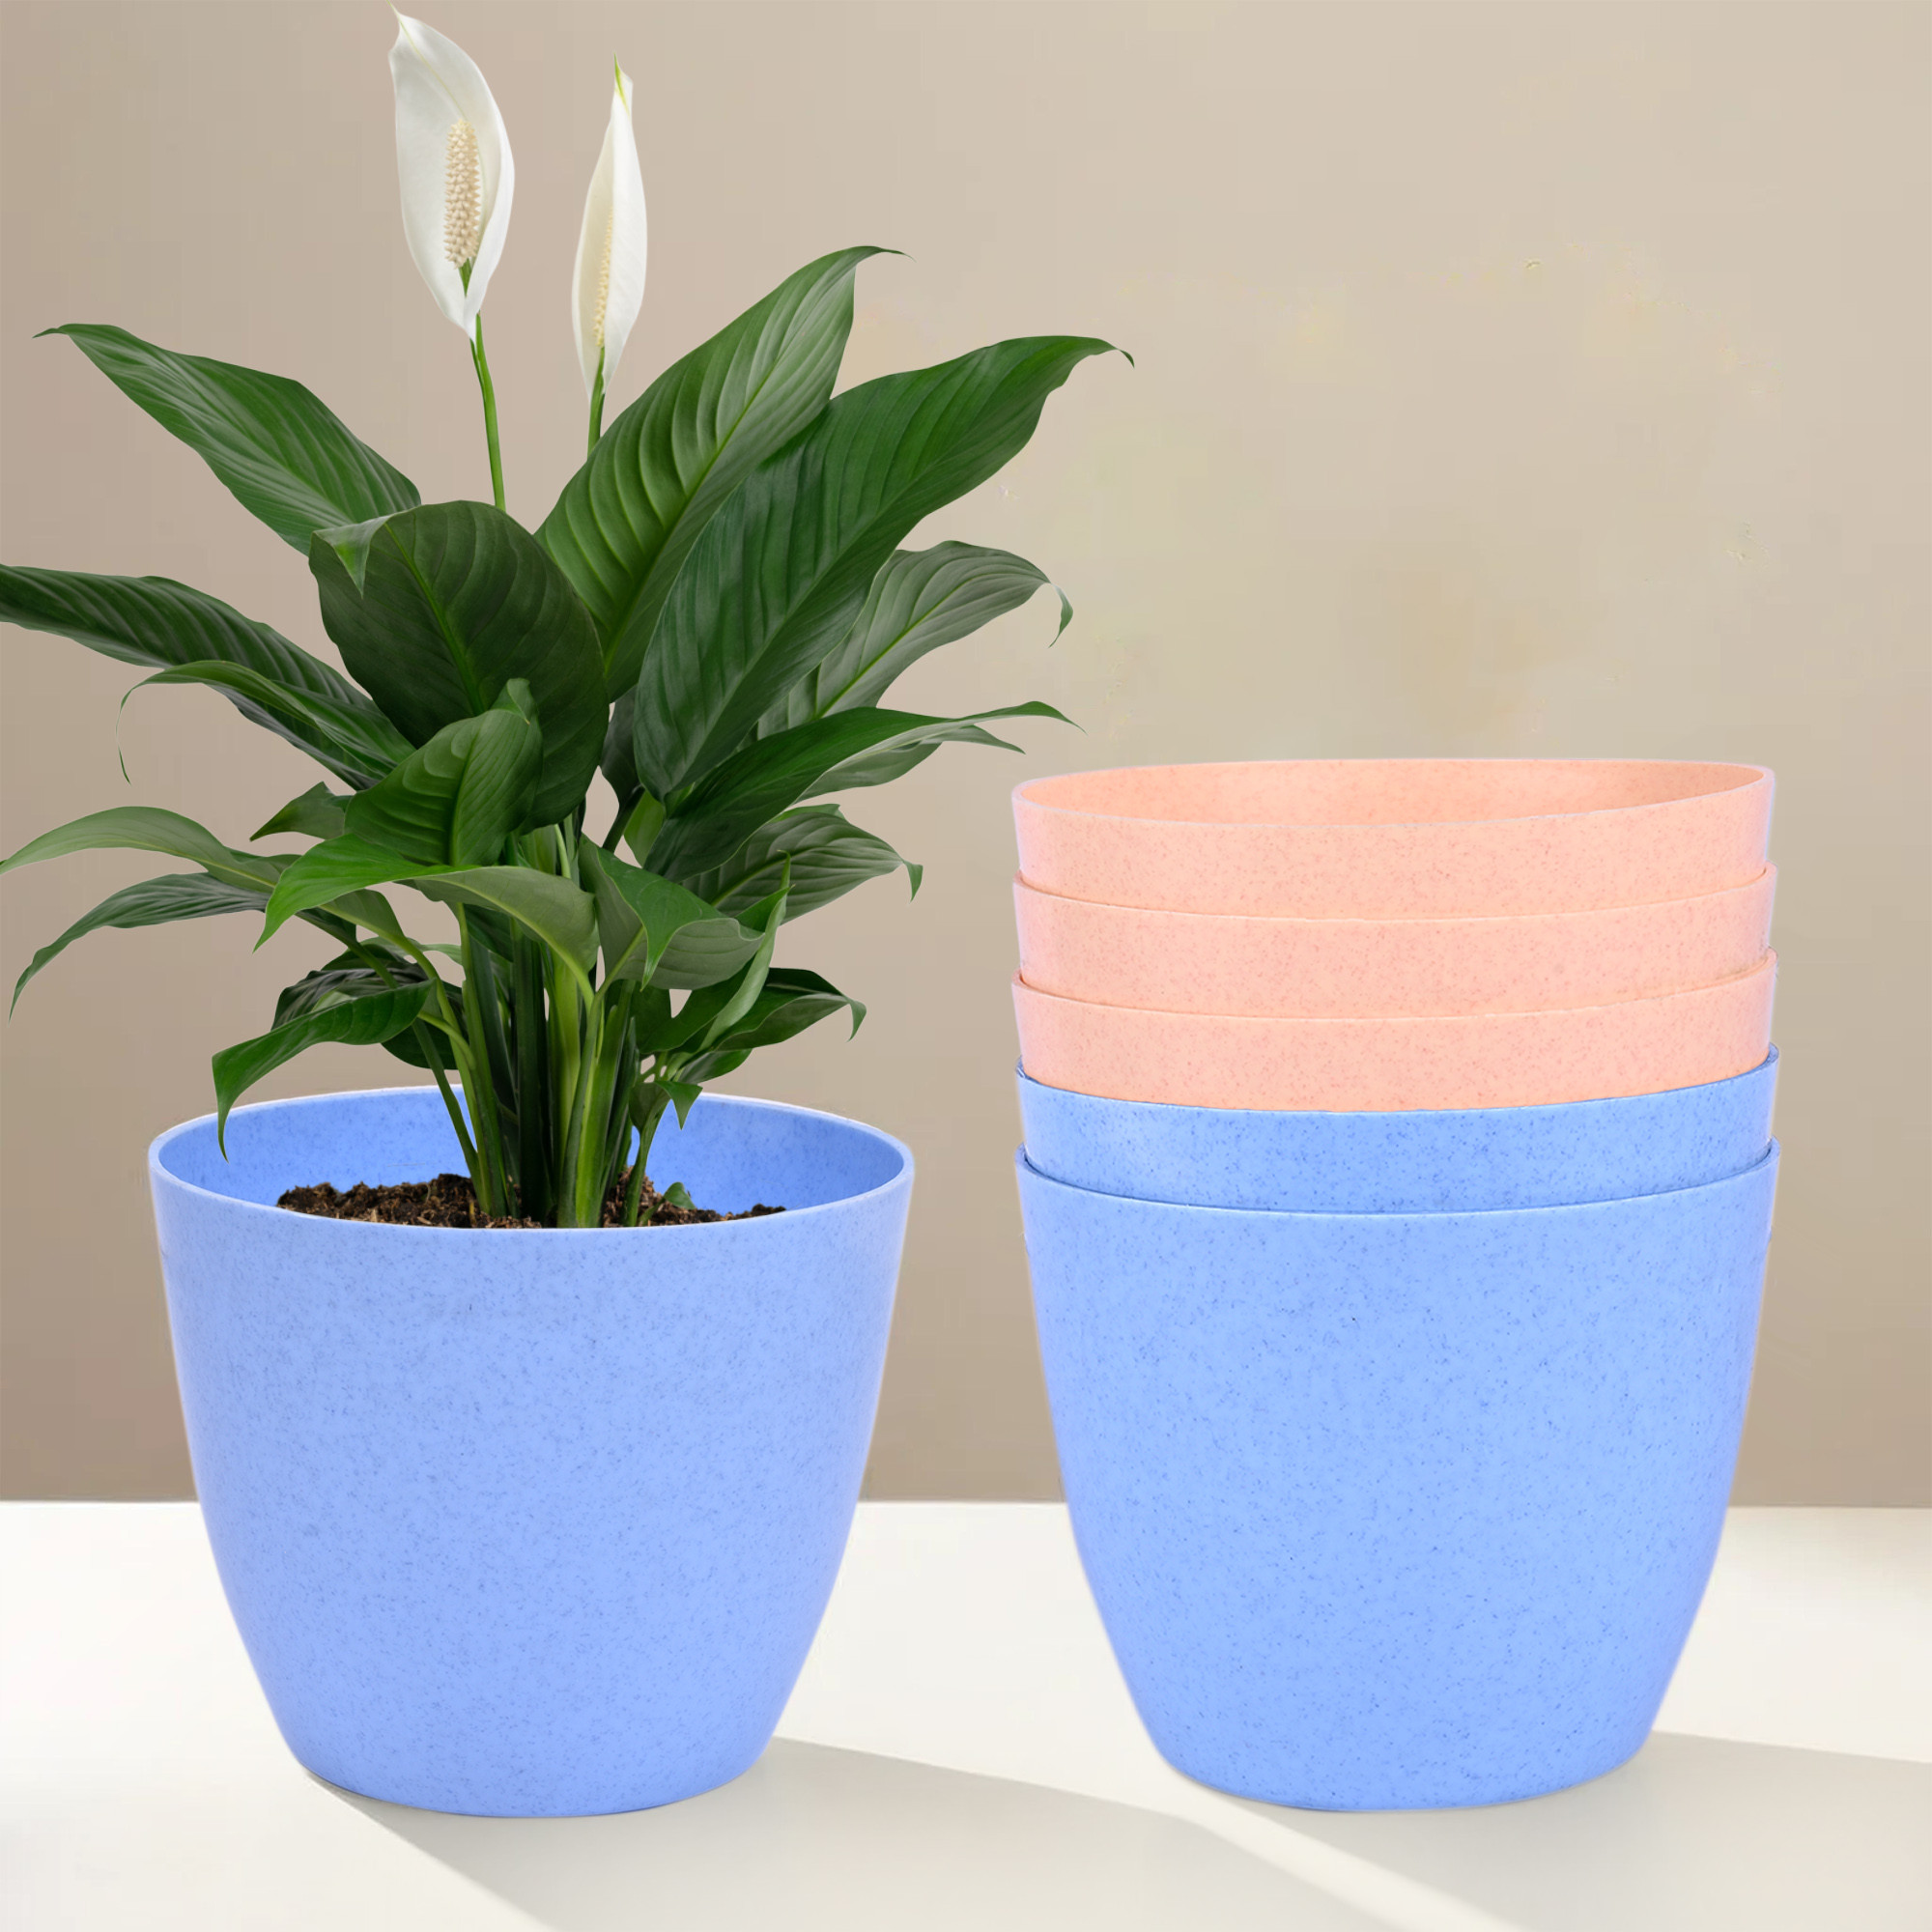 Kuber Industries Flower Pot | Flower Pot for Living Room-Office | Flower Planters for Home-office-Lawns & Garden Décor | Planters Pots for Balcony | Marble Cool | 5 Inch | Blue & Peach